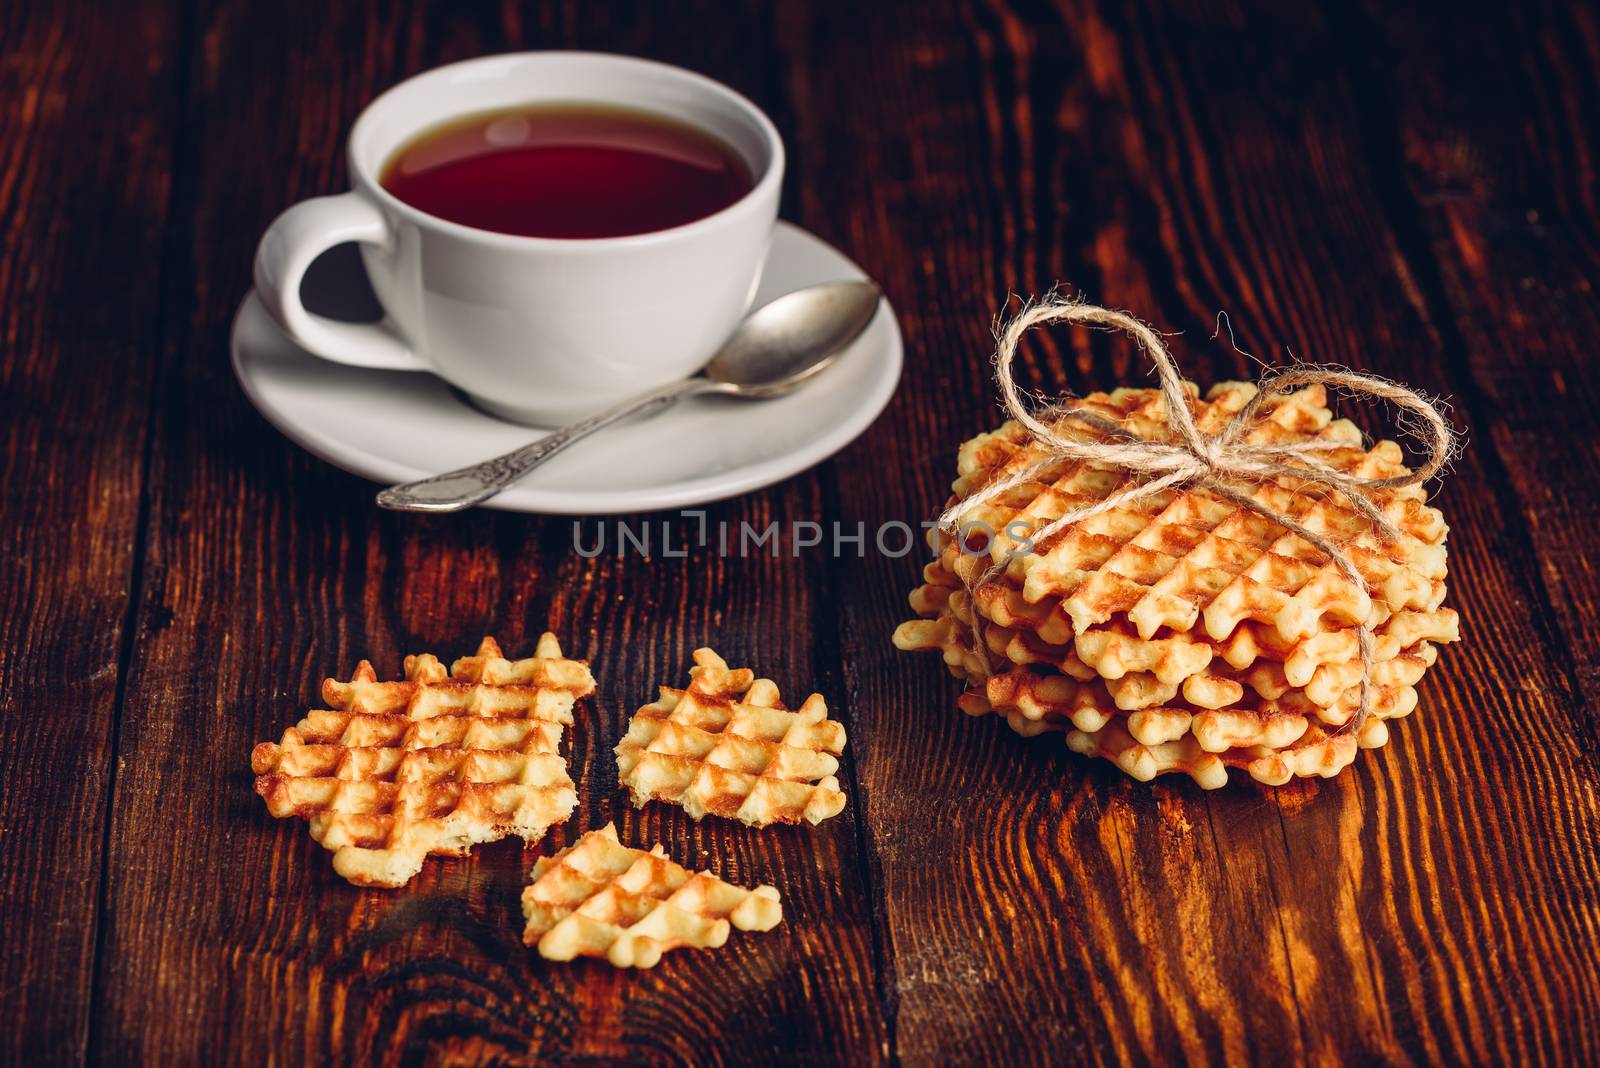 Rustic Breakfast with Waffles and Tea. by Seva_blsv